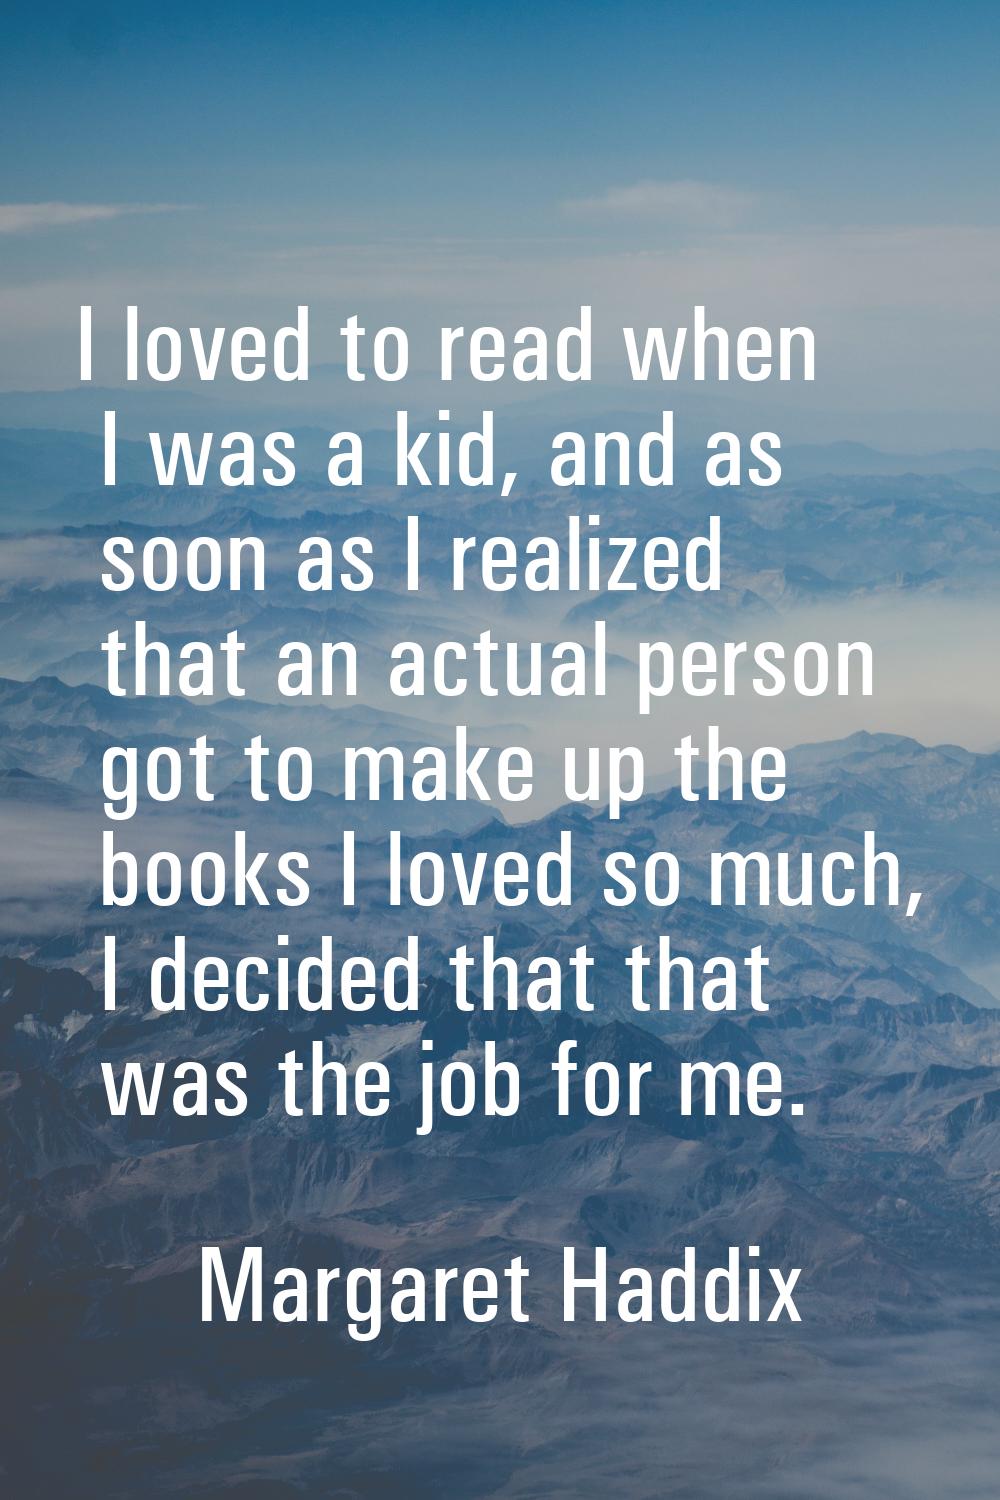 I loved to read when I was a kid, and as soon as I realized that an actual person got to make up th